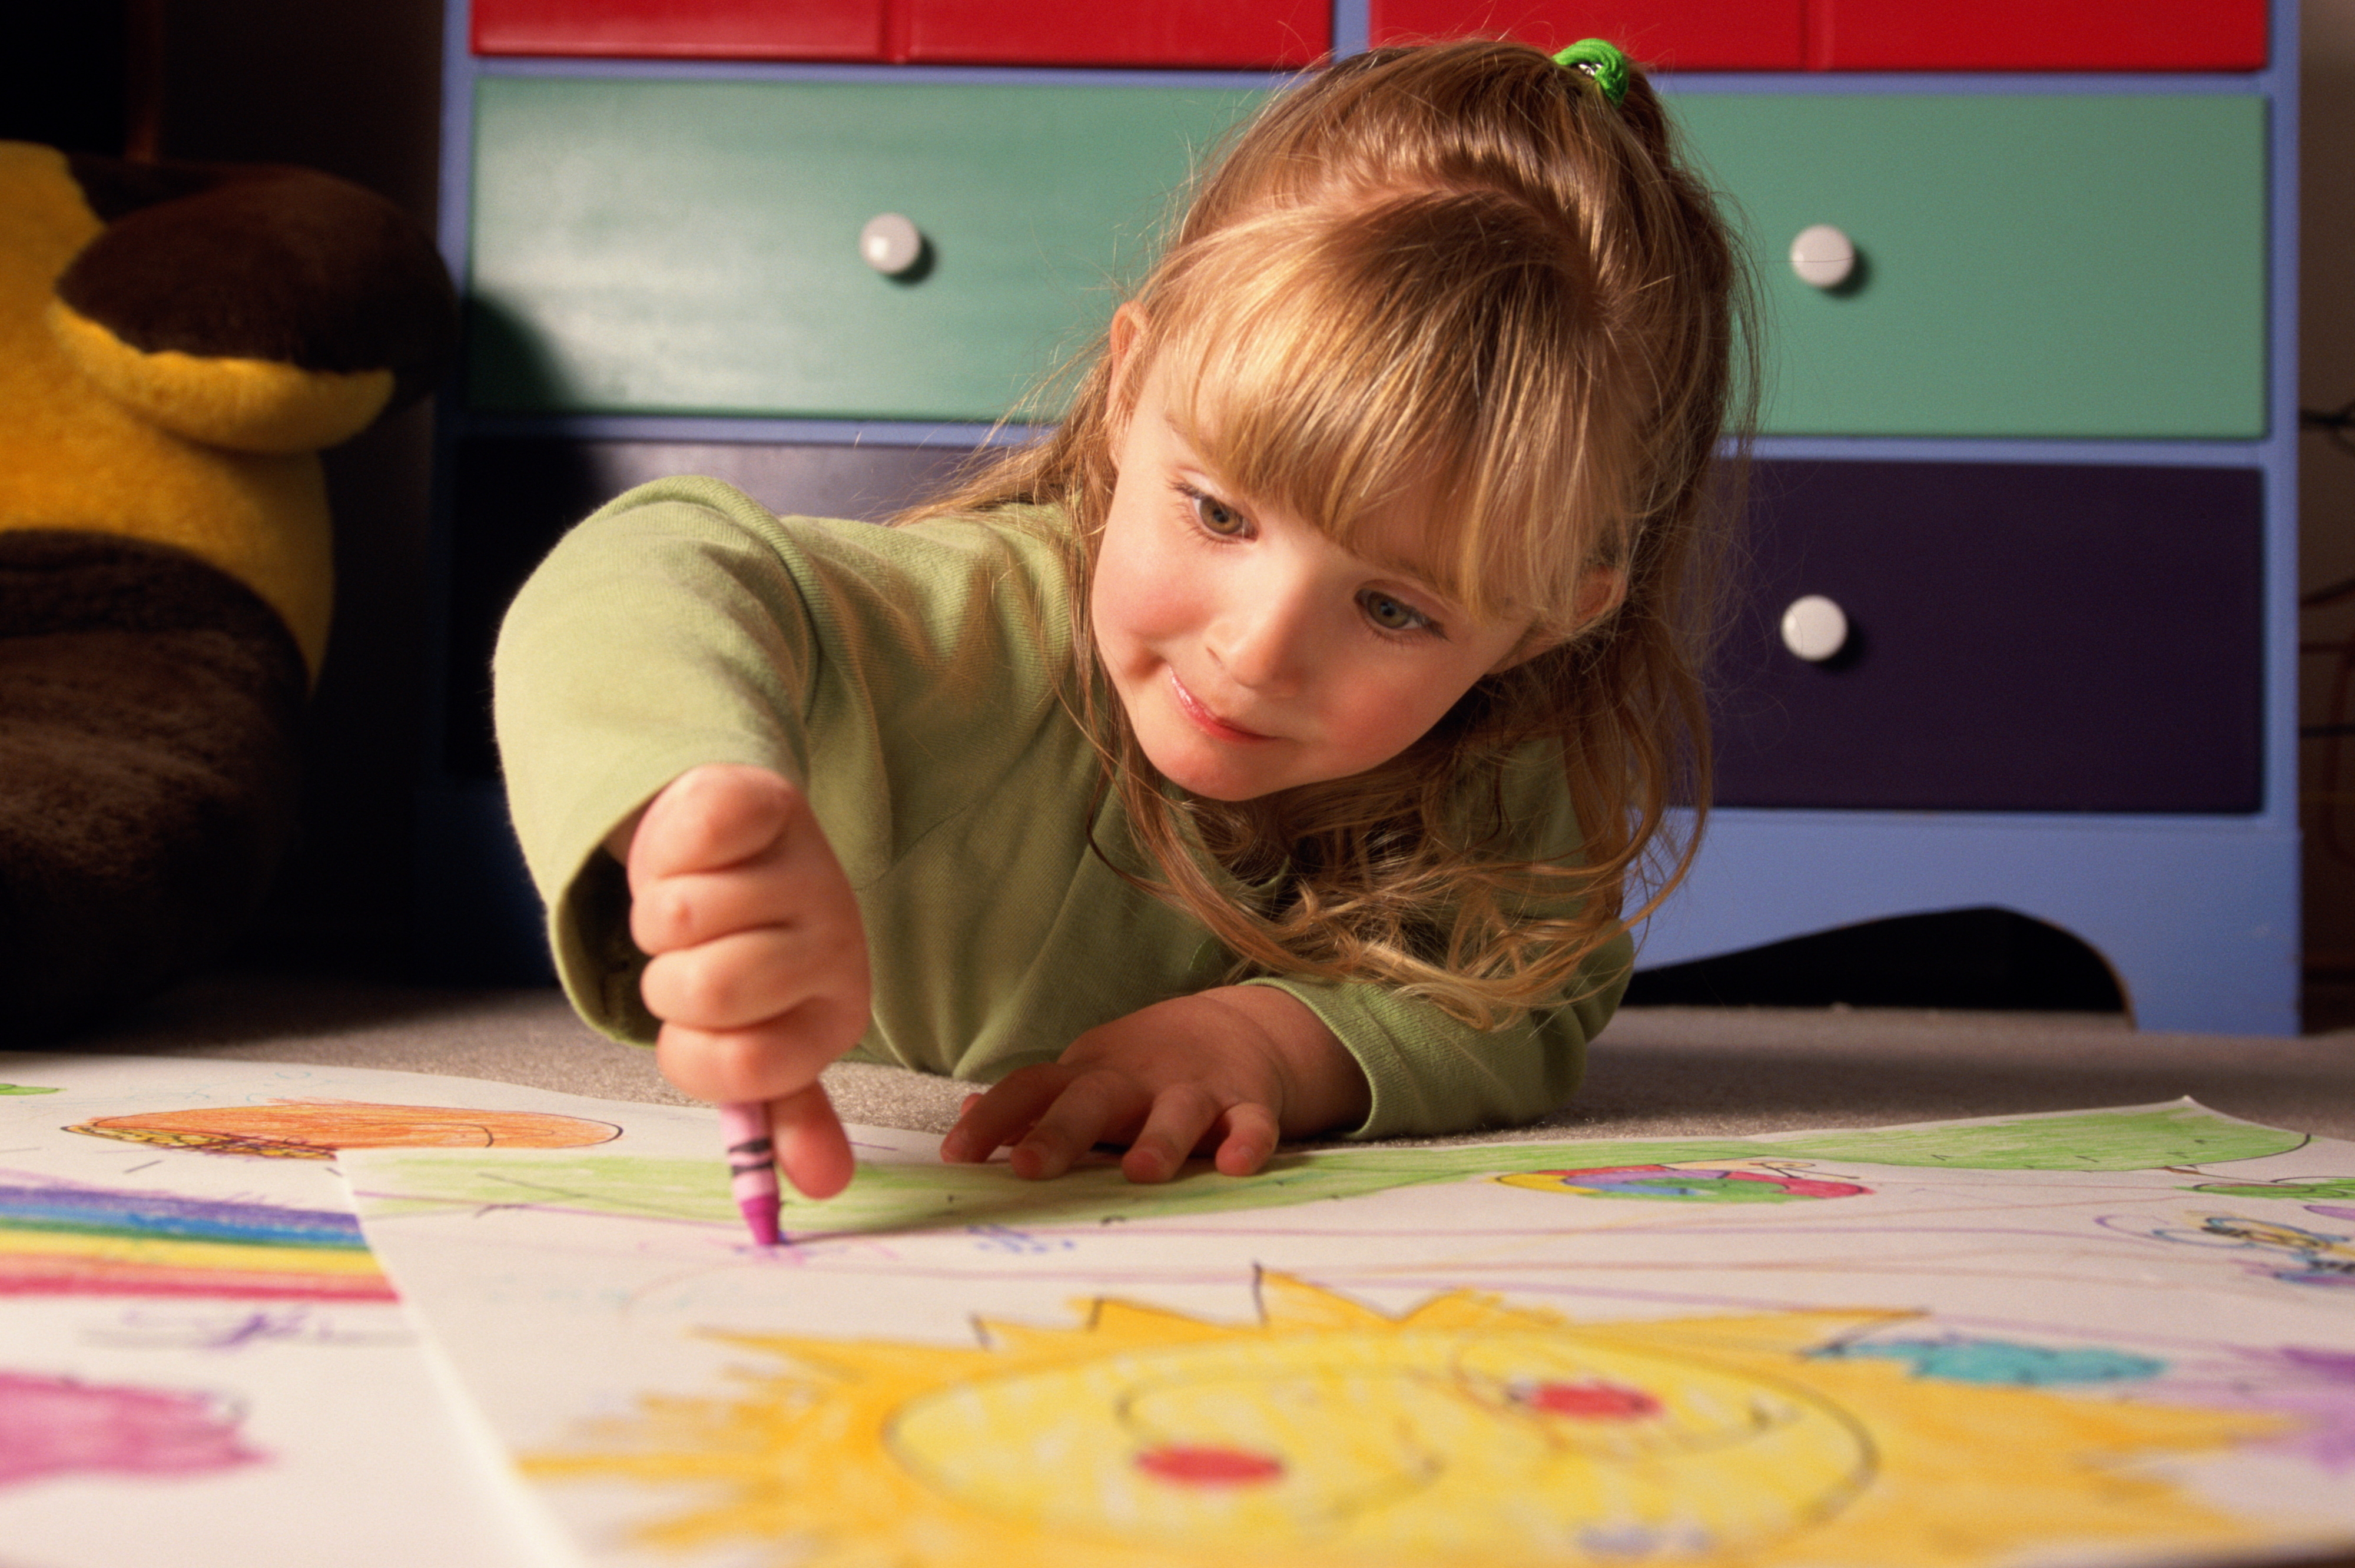 Child drawing on paper with crayons at a table, focused on artwork